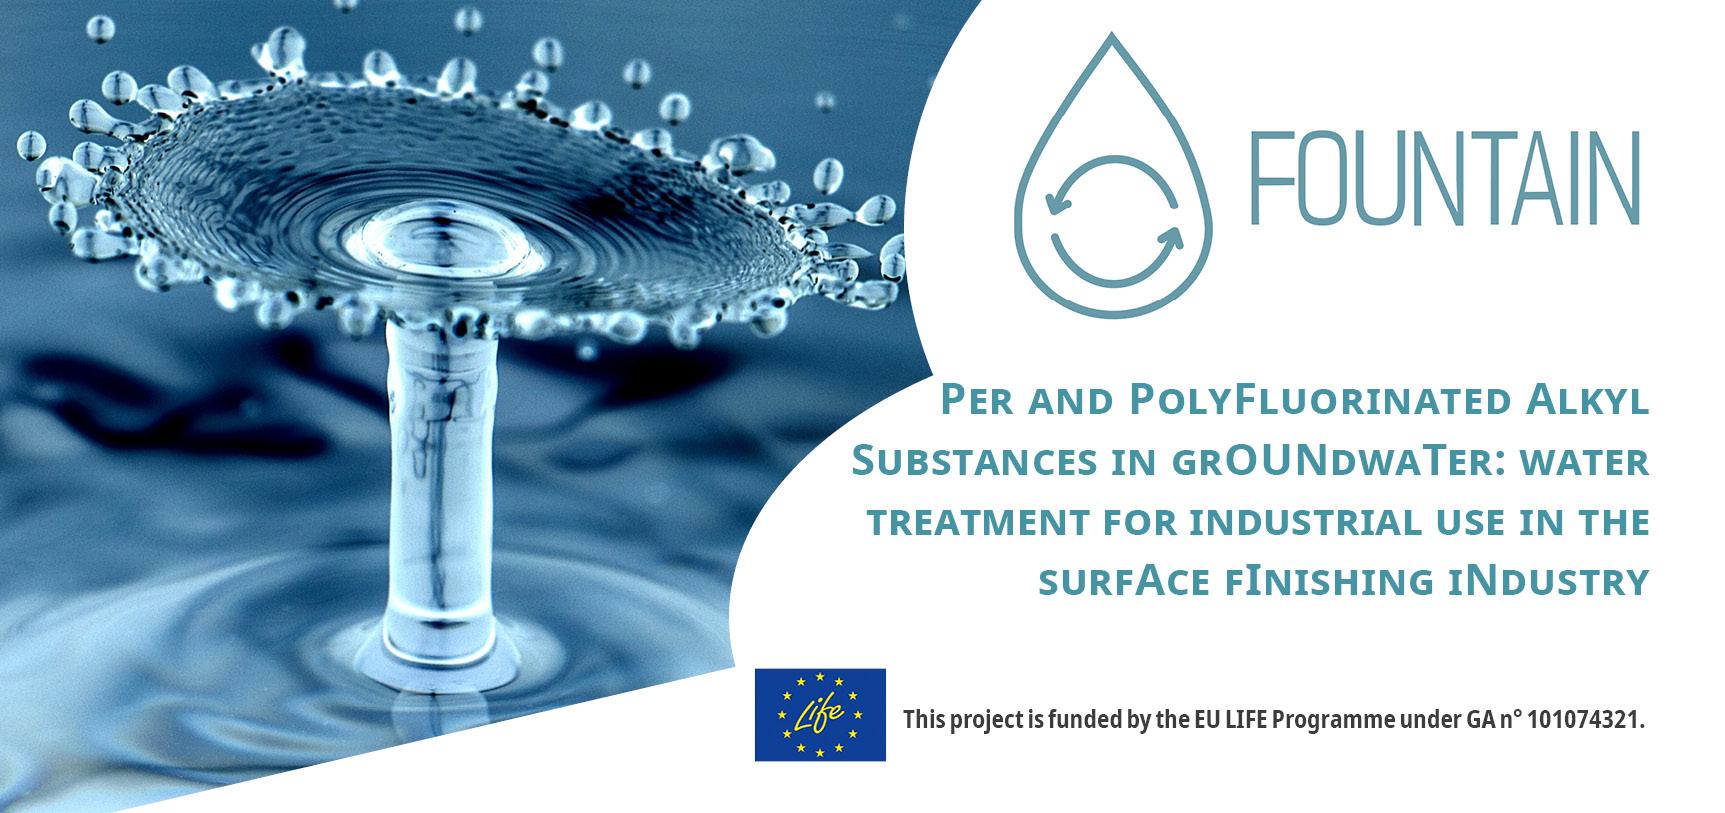 fountaineuproject, Per and PolyFluorinated Alkyl Substances in grOUNdwaTer: water treatment for industrial use in the surfAce fInishing iNdustry